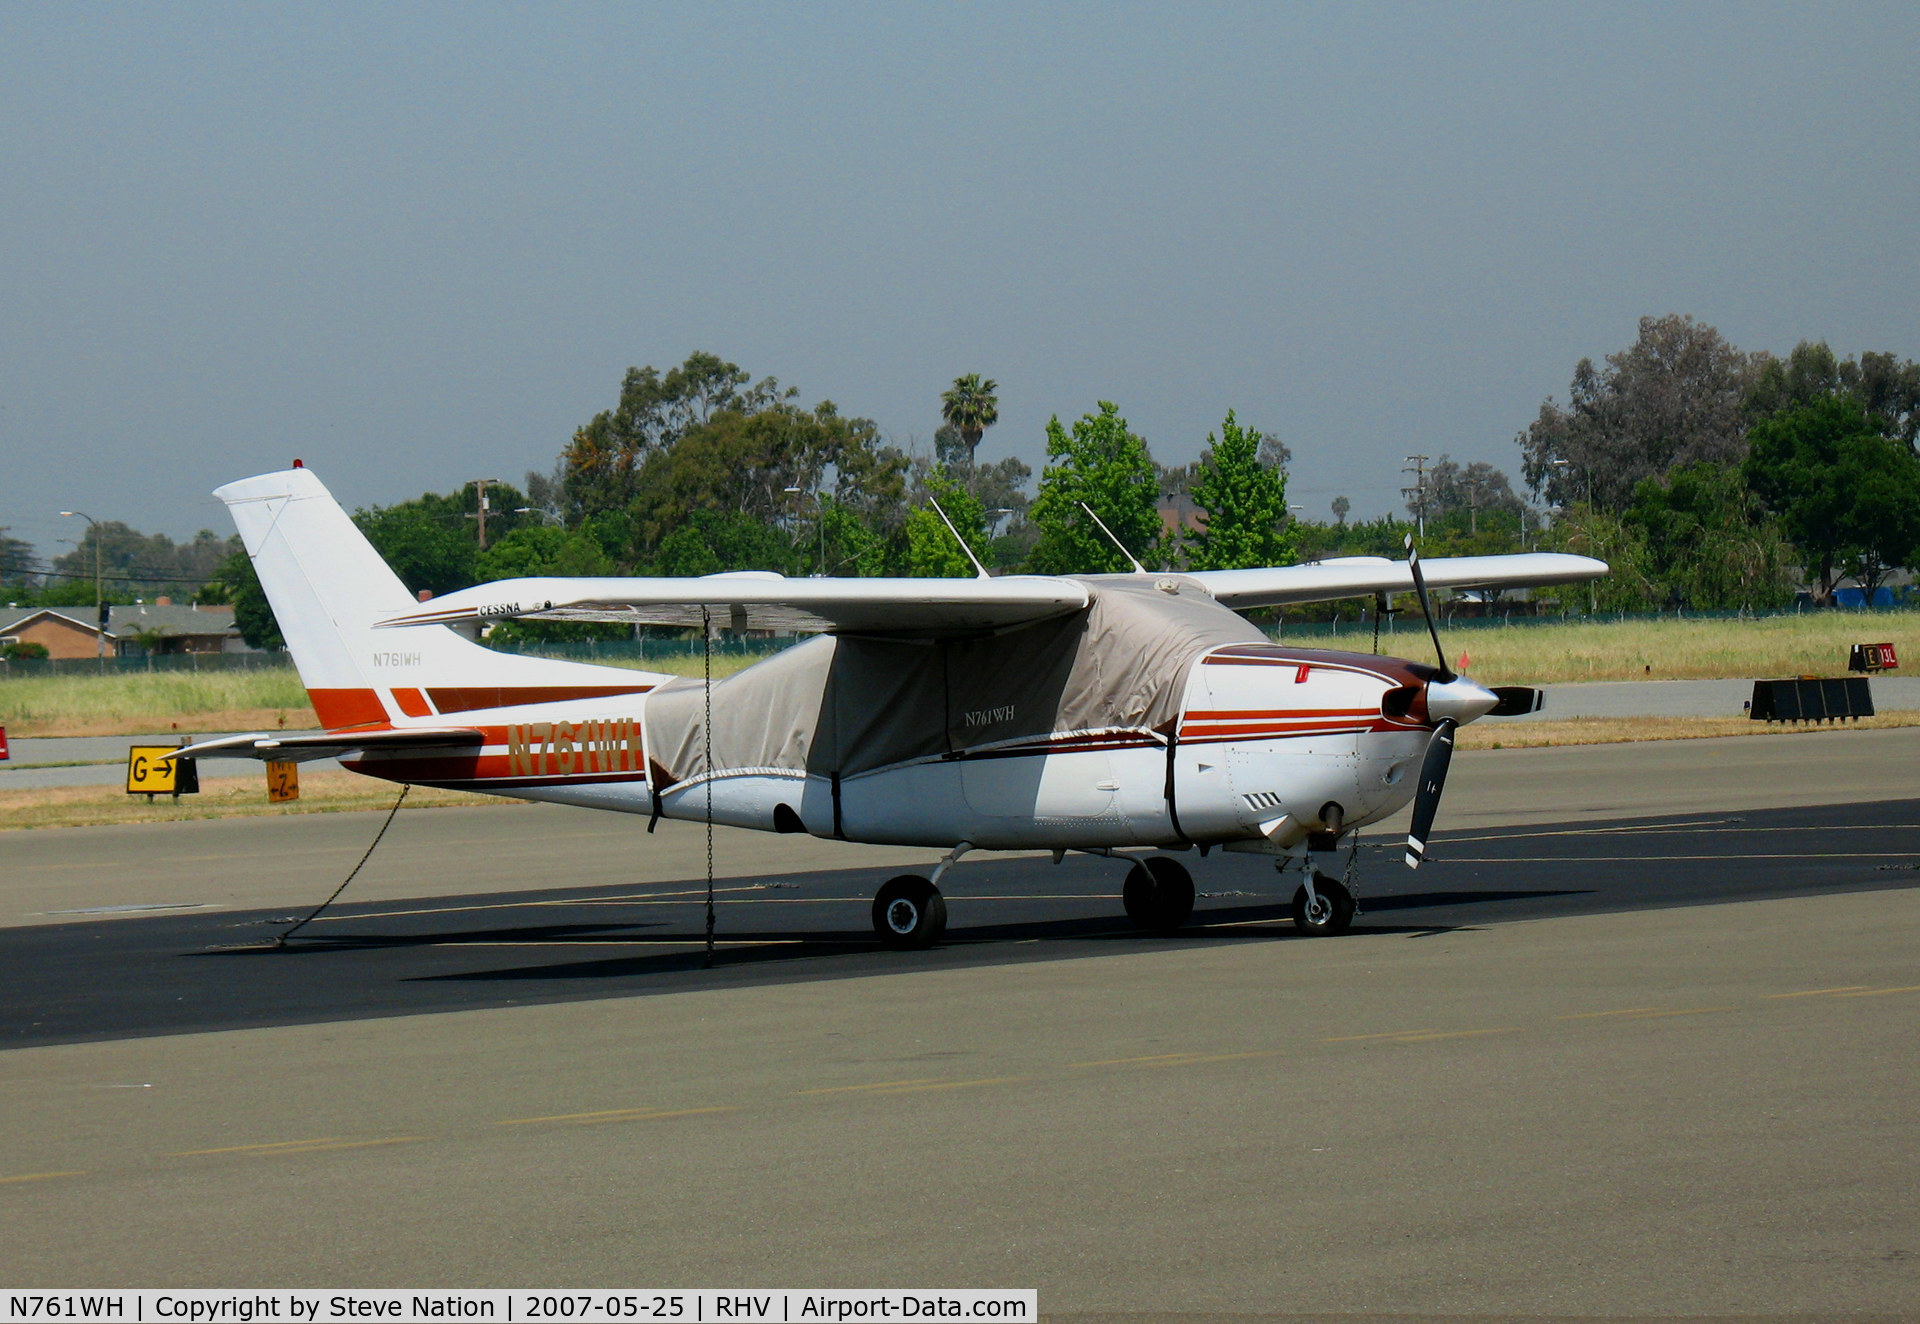 N761WH, 1978 Cessna T210M Turbo Centurion C/N 21062573, Two (2) registrations are better than one (!) on Tri-Wings LLC 1978 Cessna T210M visiting from Reno @ Reid-Hillview airport, CA